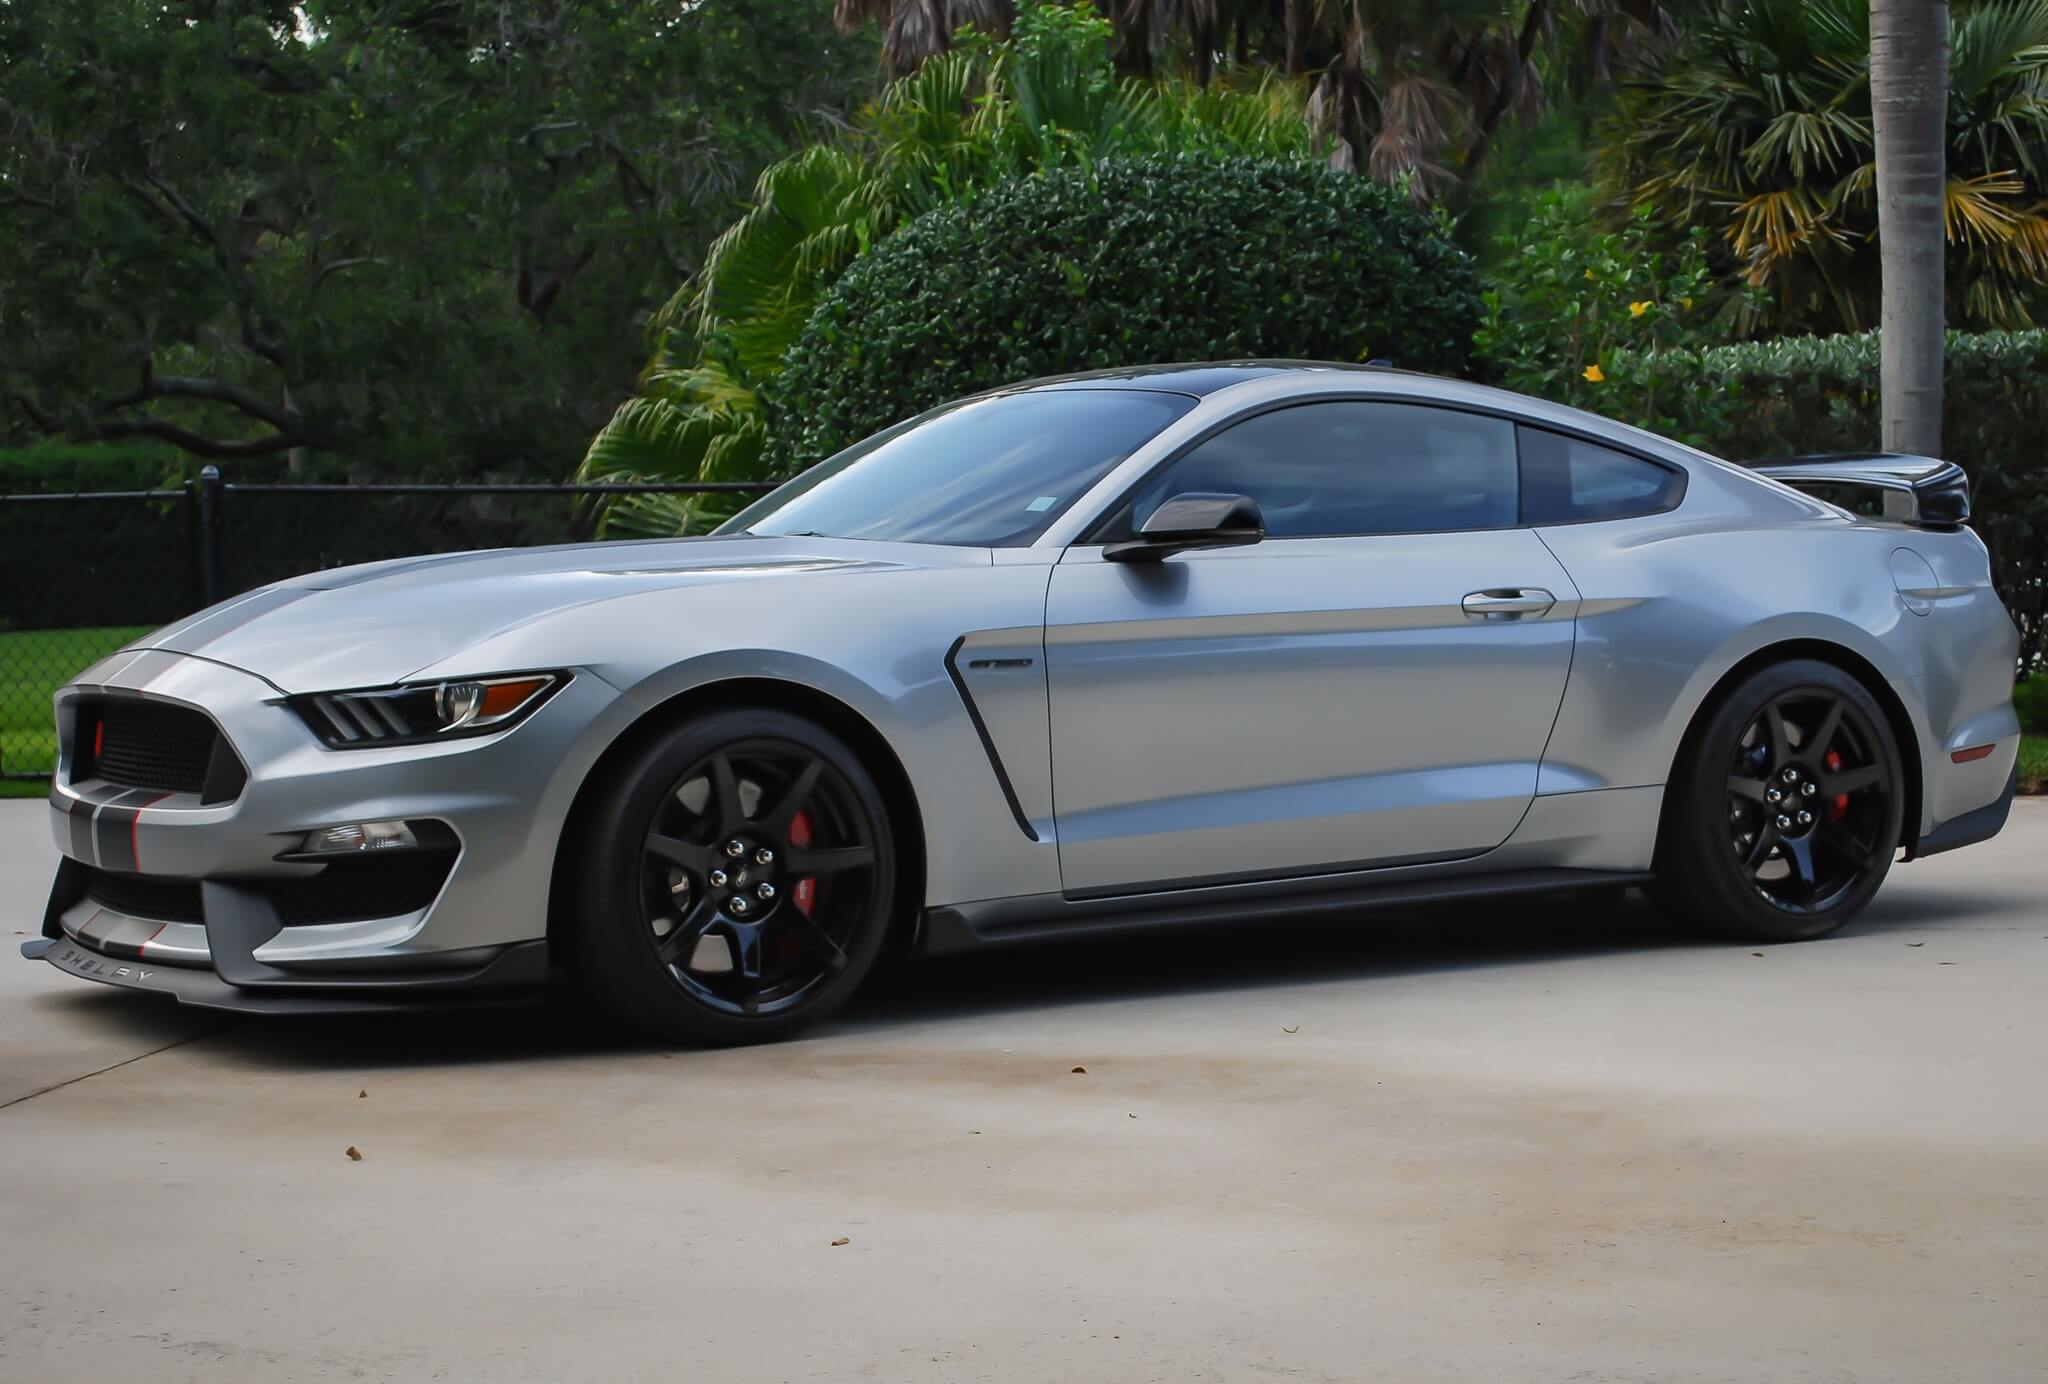 Mustang Of The Day: 2020 Ford Mustang Shelby GT350R